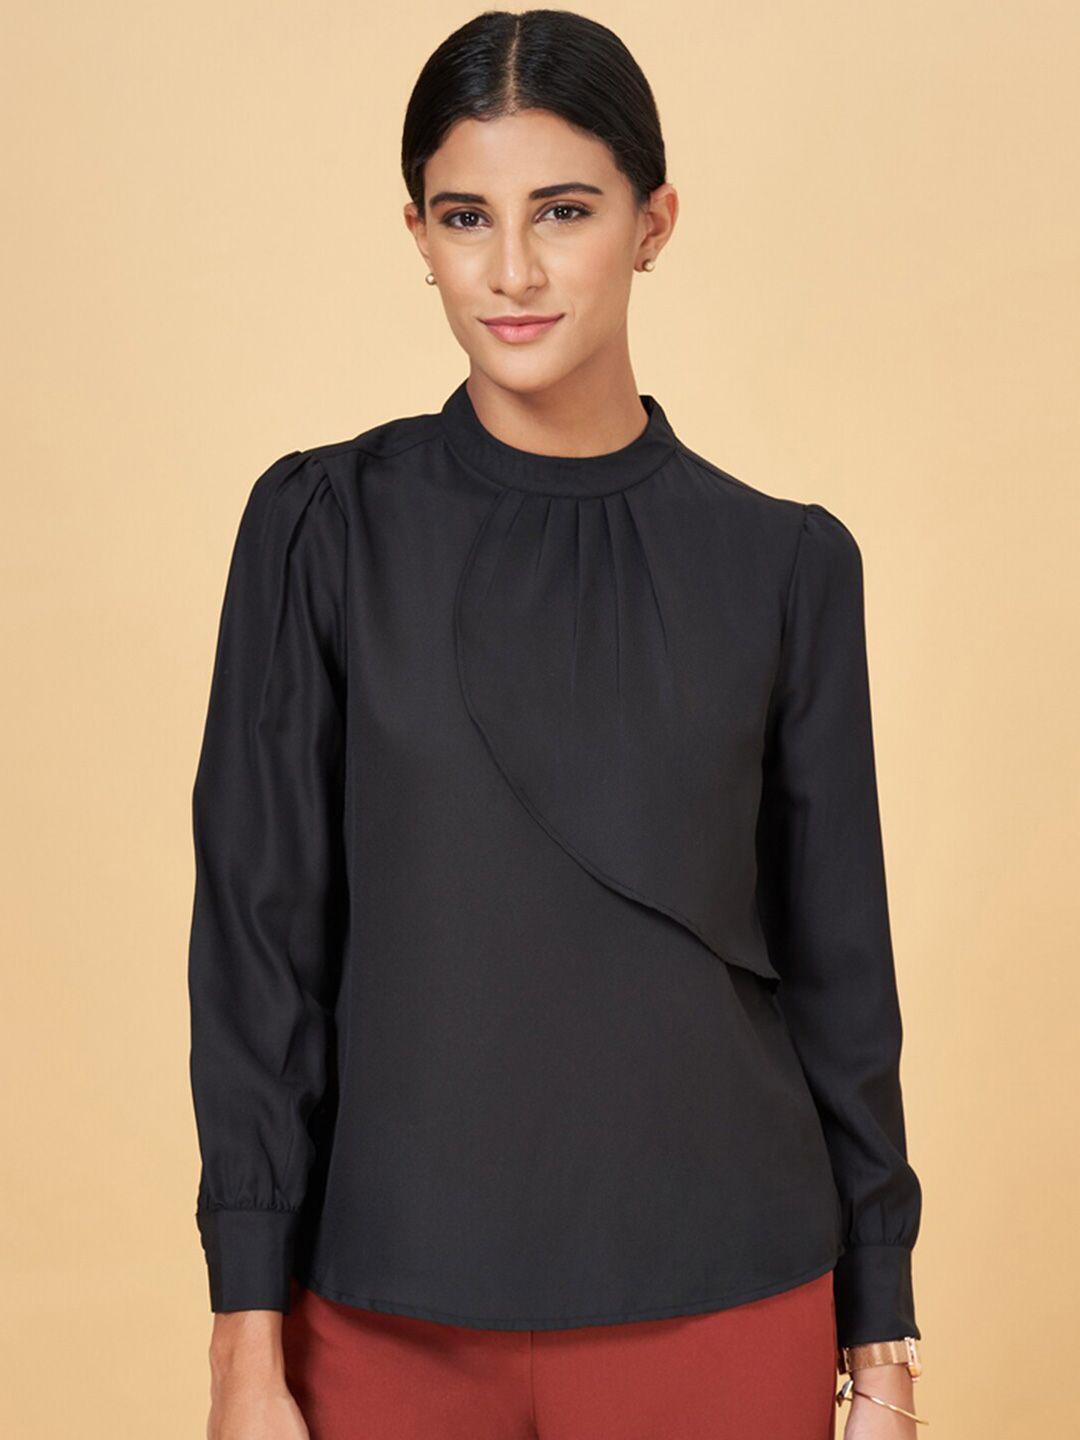 annabelle-by-pantaloons-high-neck-long-sleeves-top